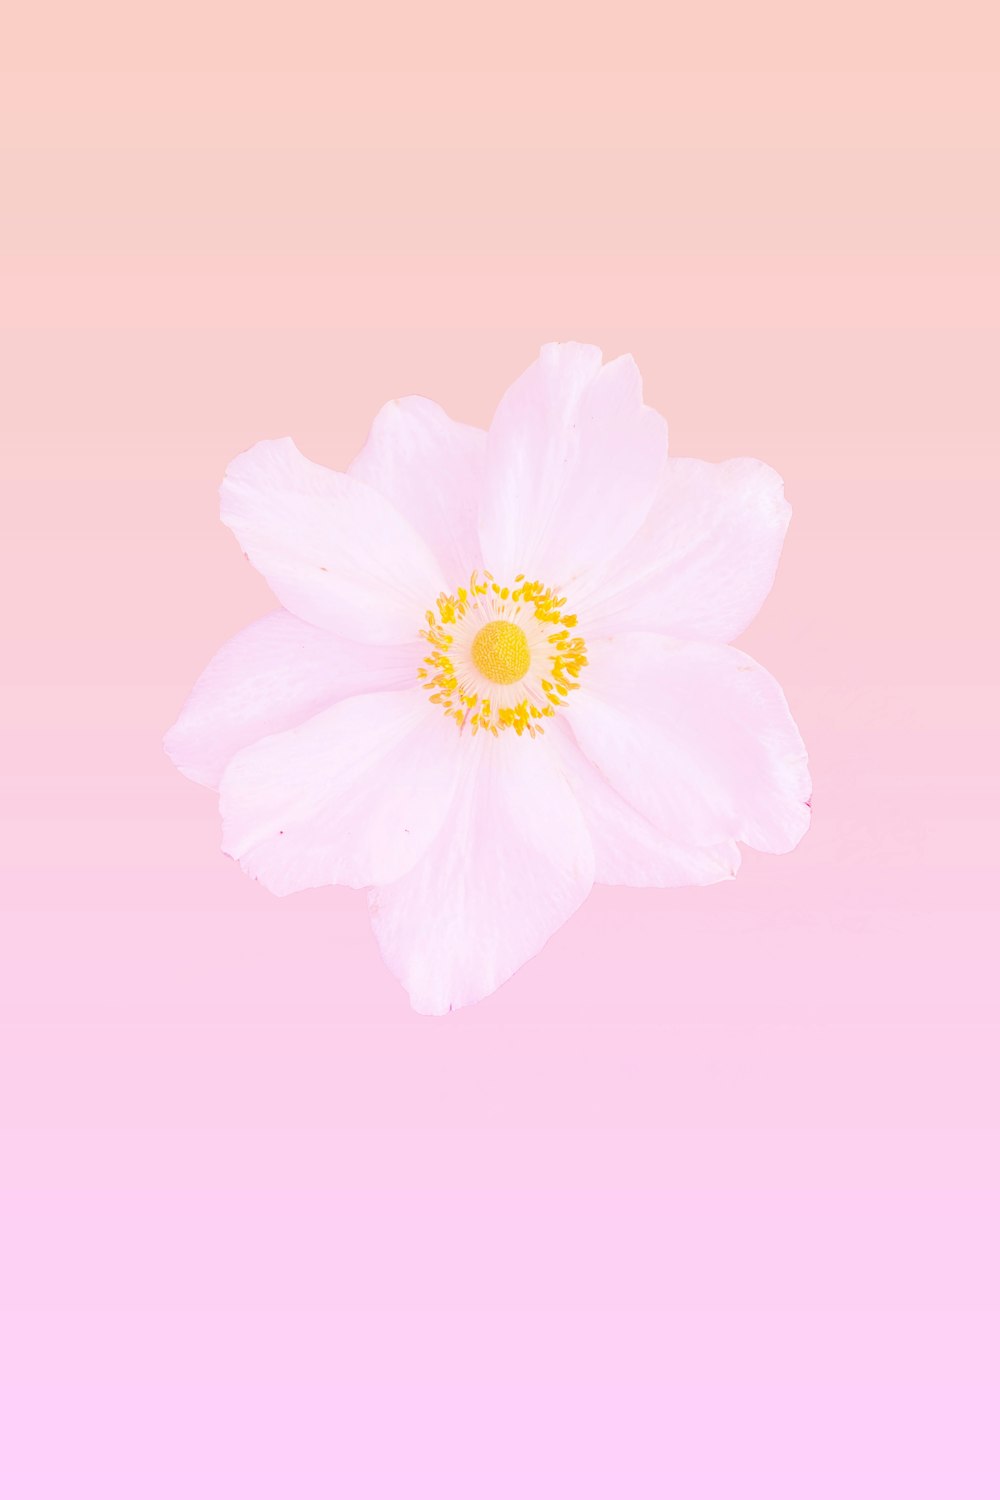 a white flower with a yellow center on a pink background